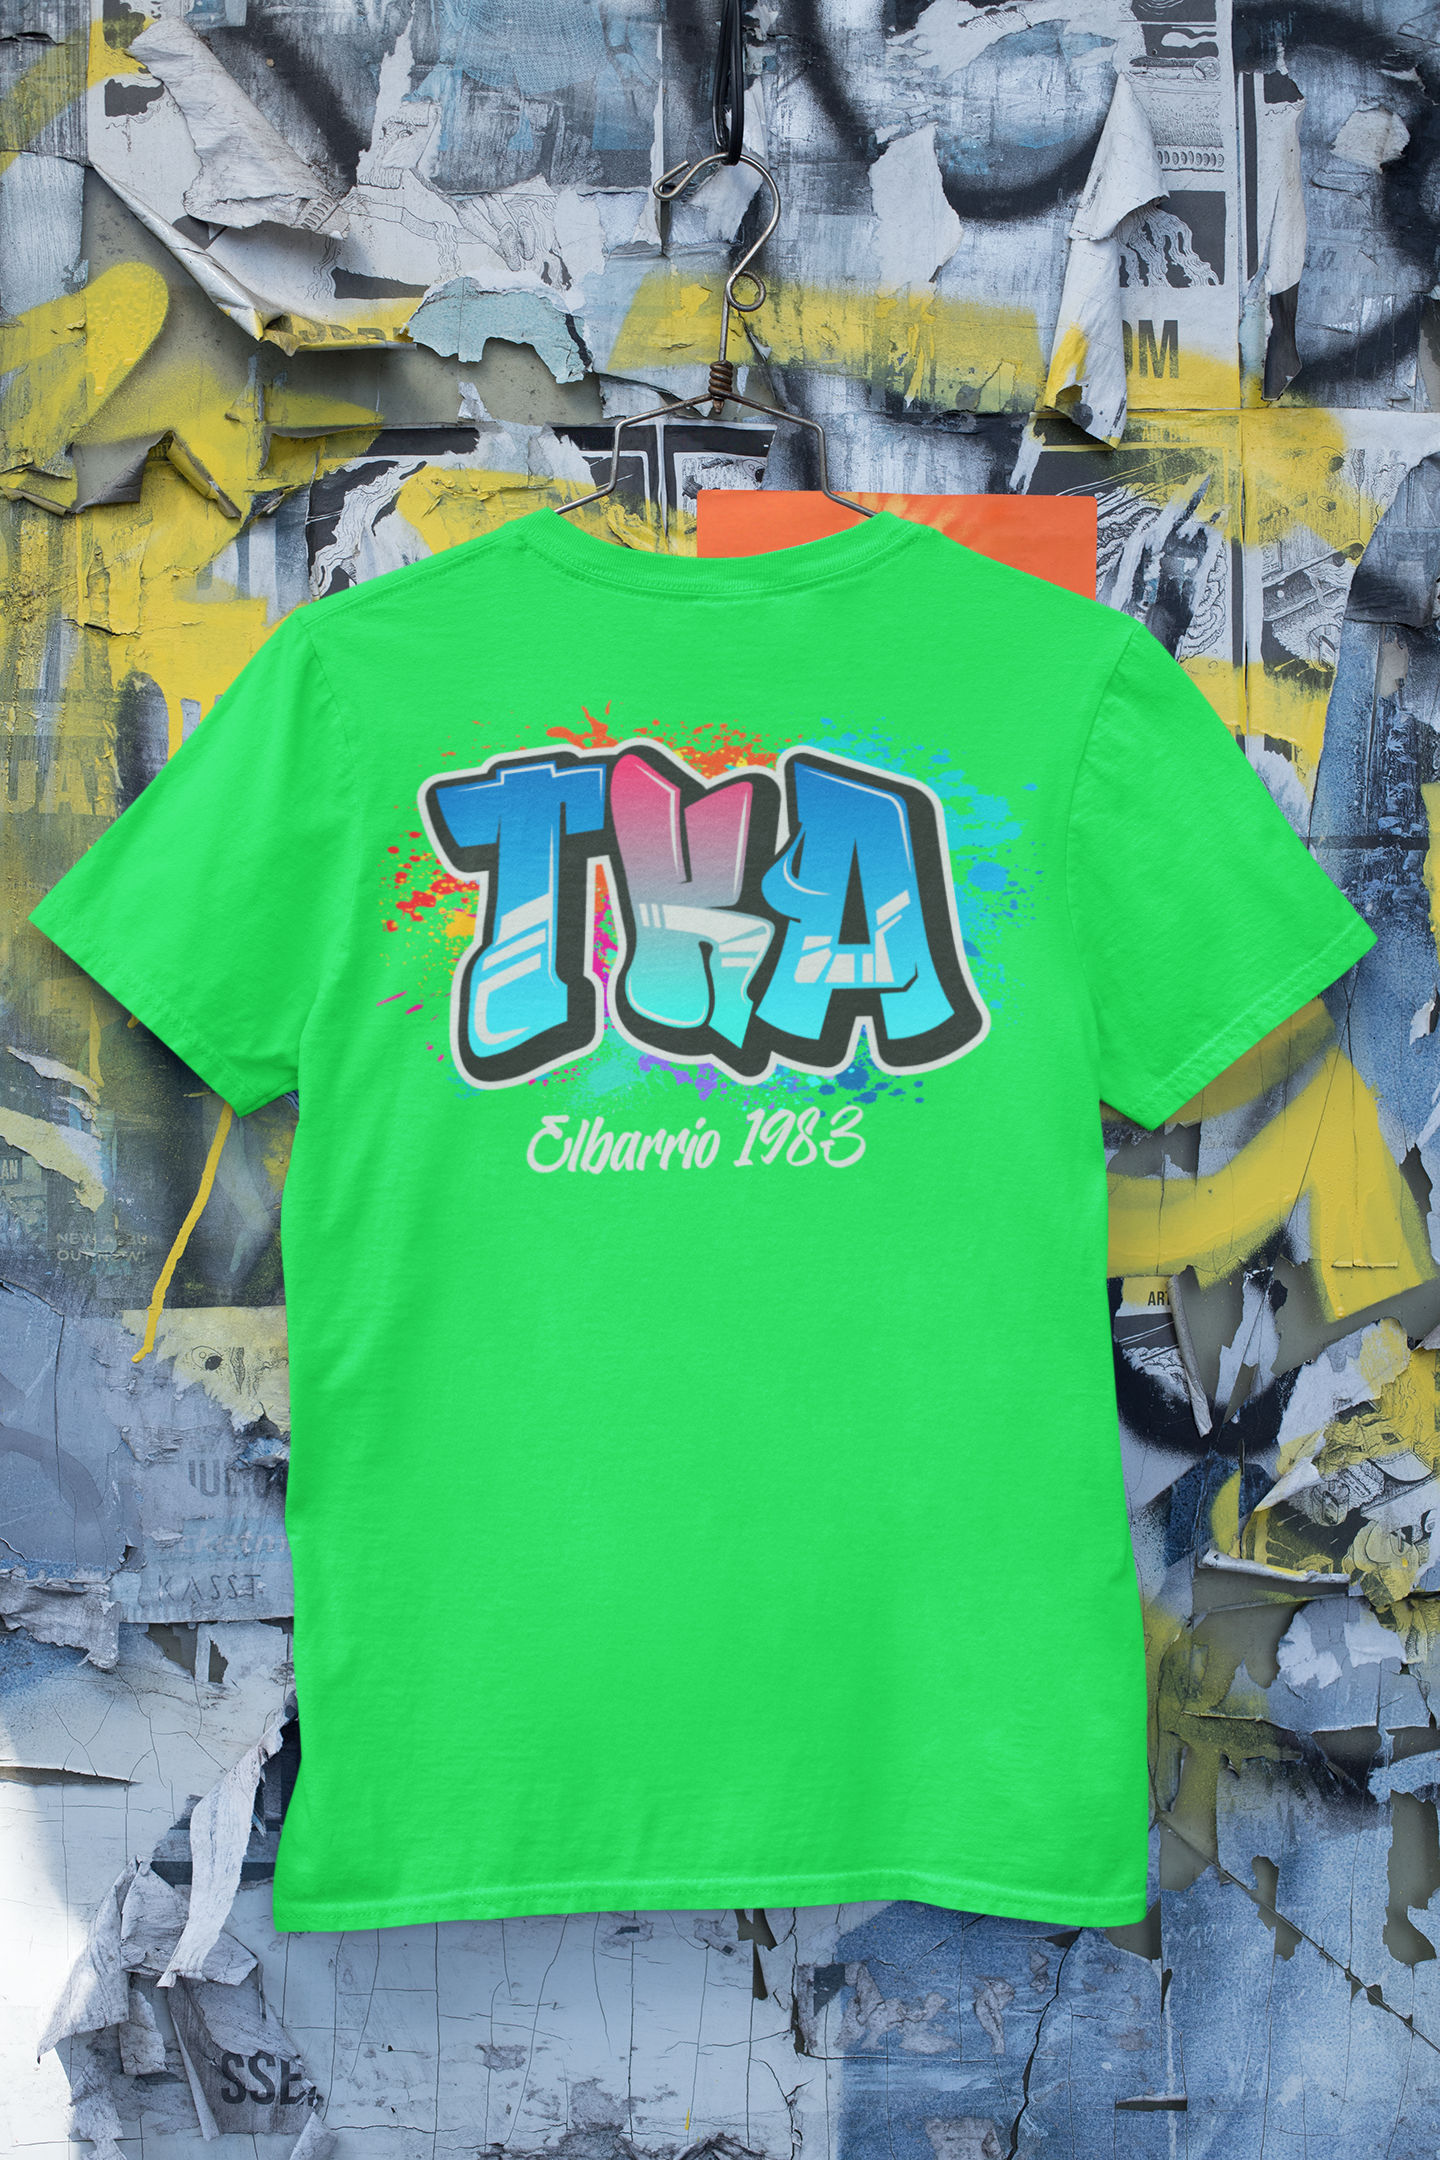 Brought to you by "TONY TKA” The Official T.K.A. logo Tee.